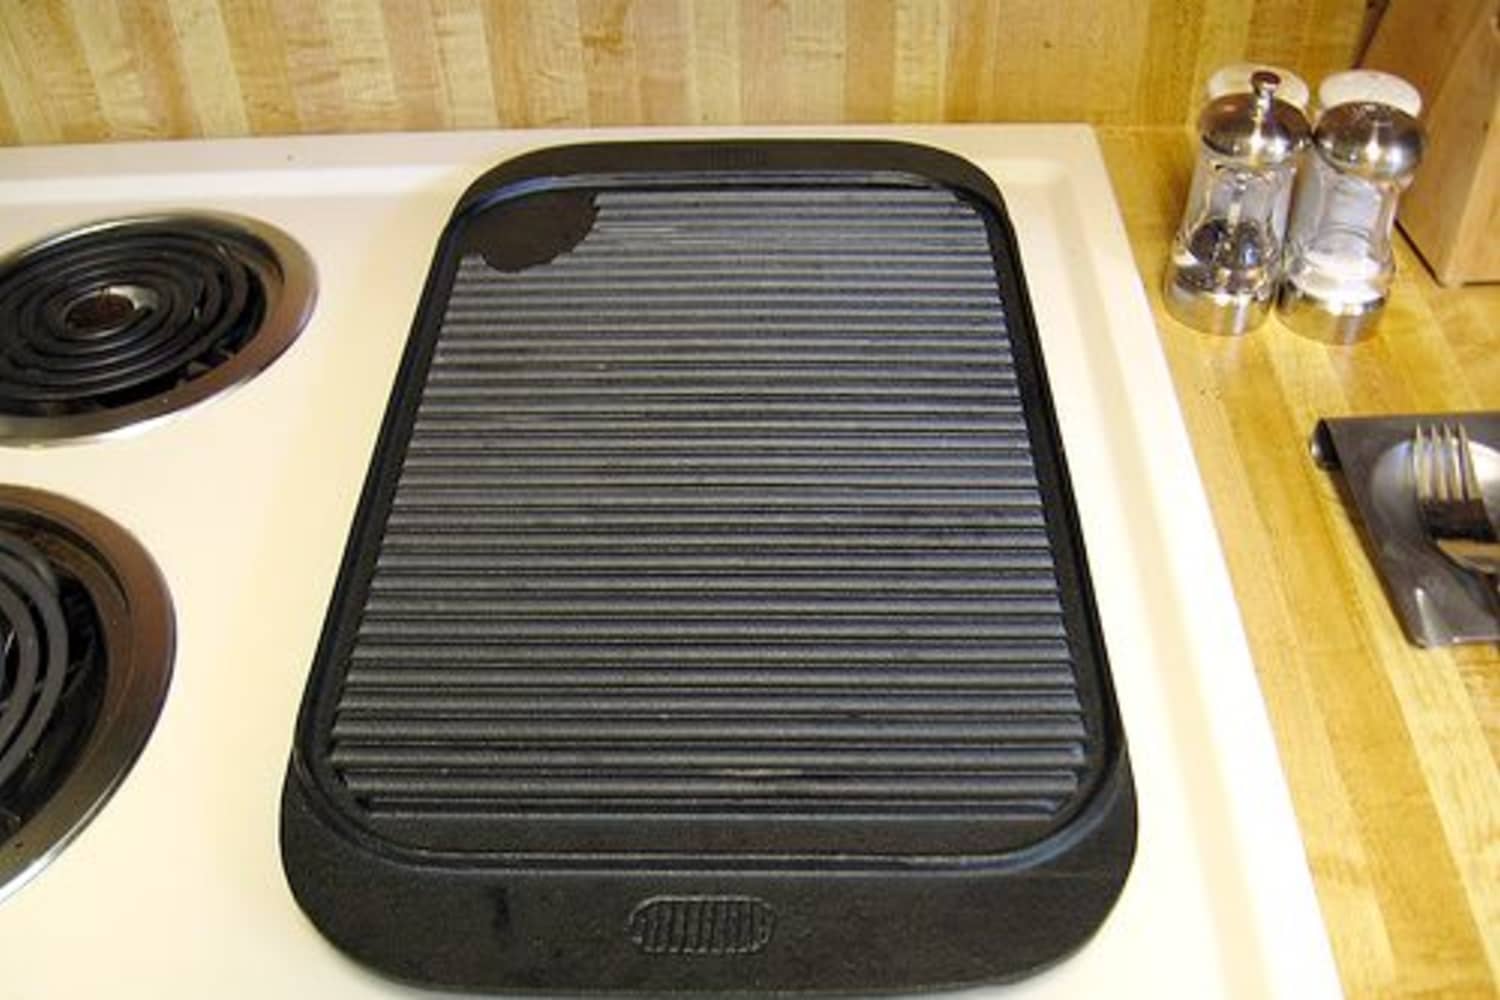 How to Use a Griddle to Cook on Your Stove-Top